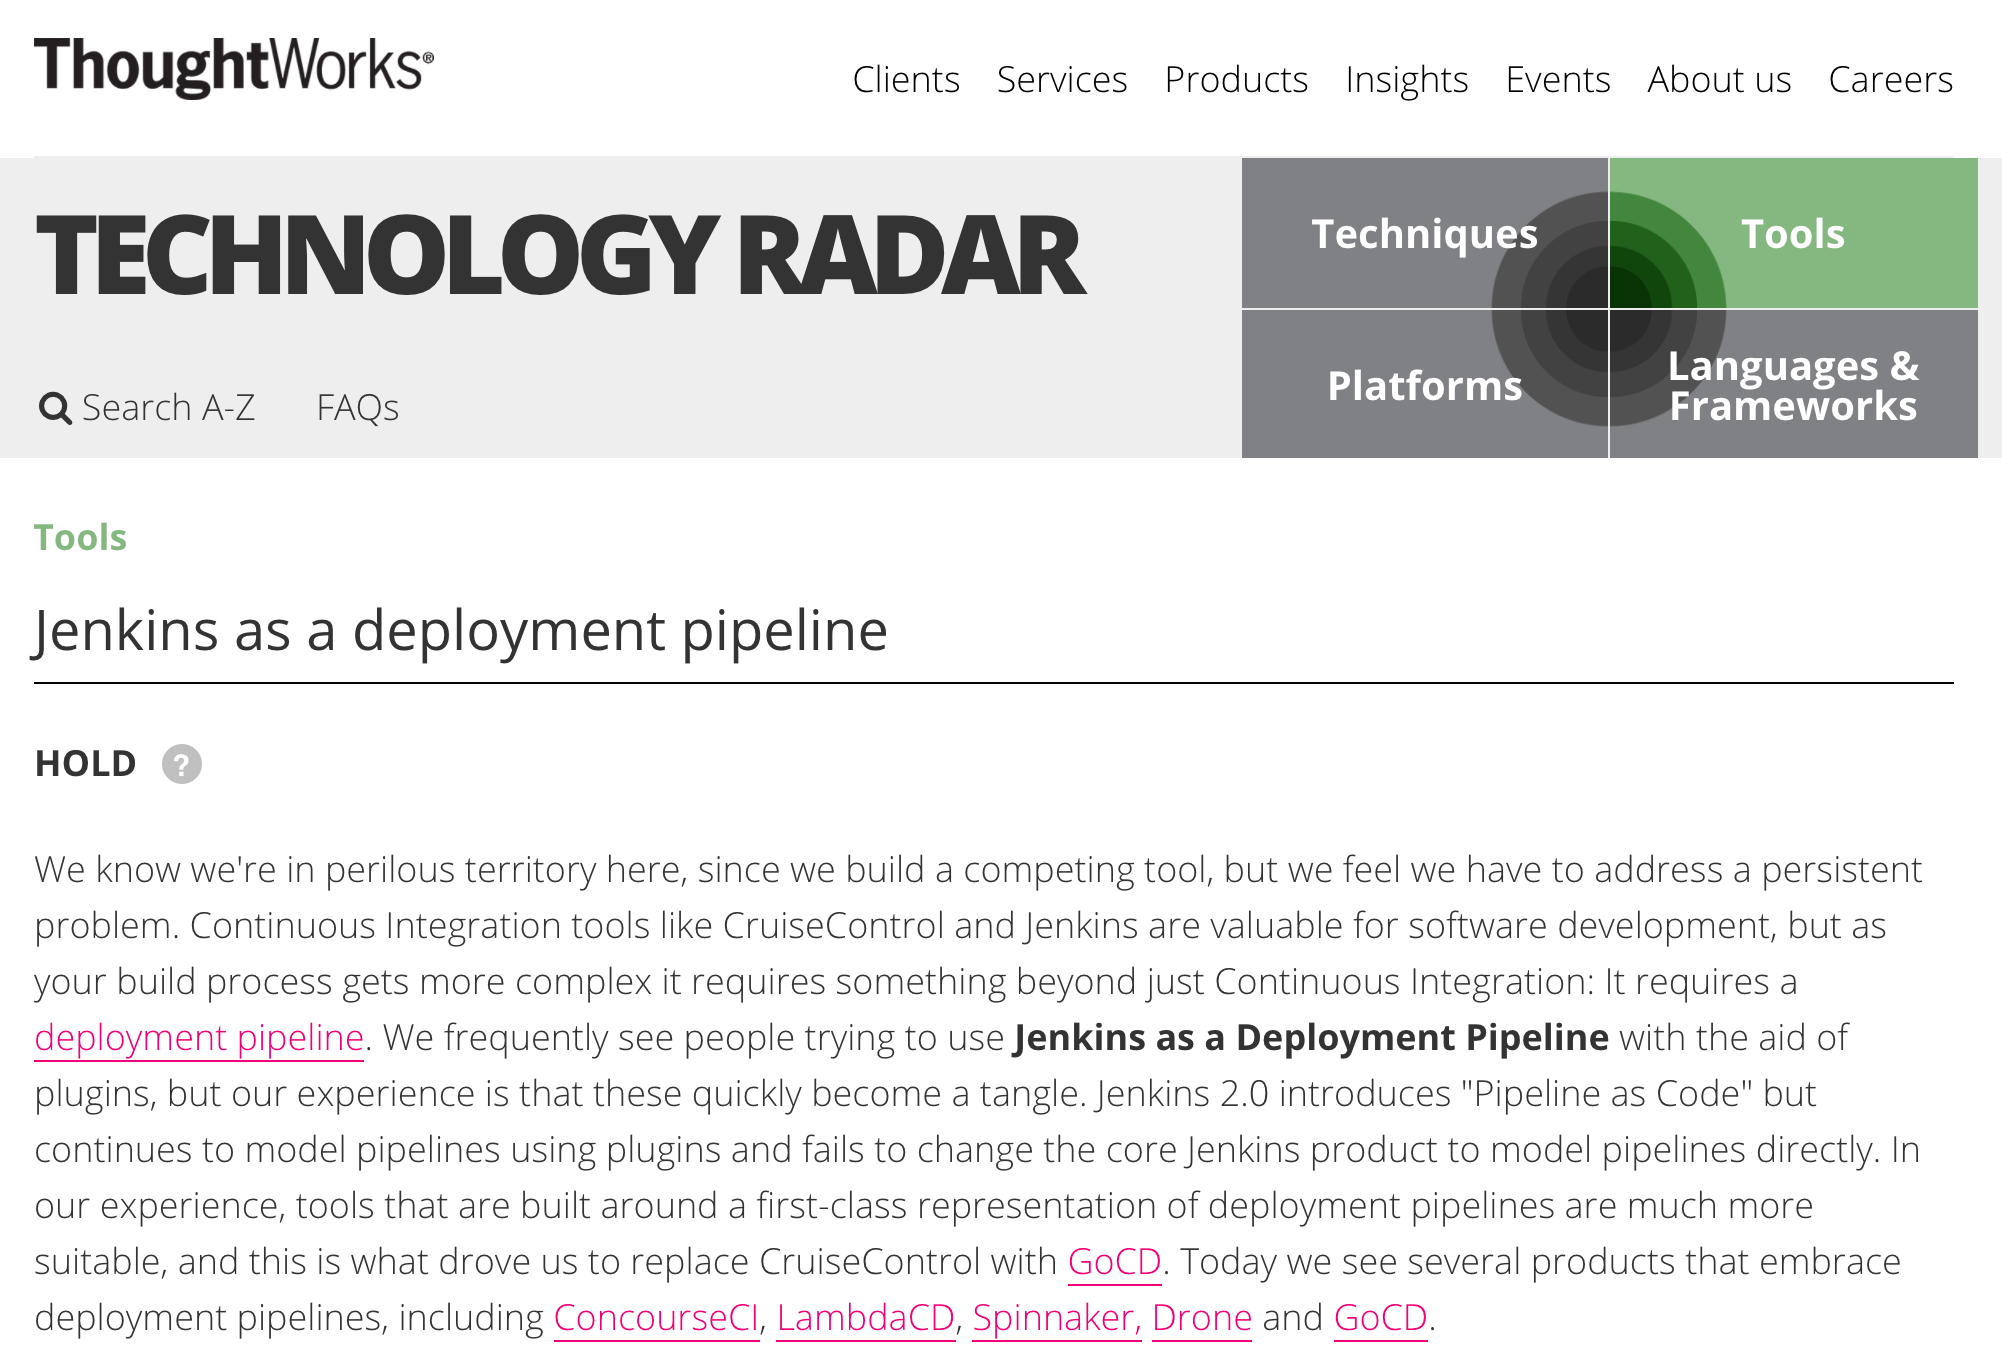 say no to Jenkins as a deployment pipeline